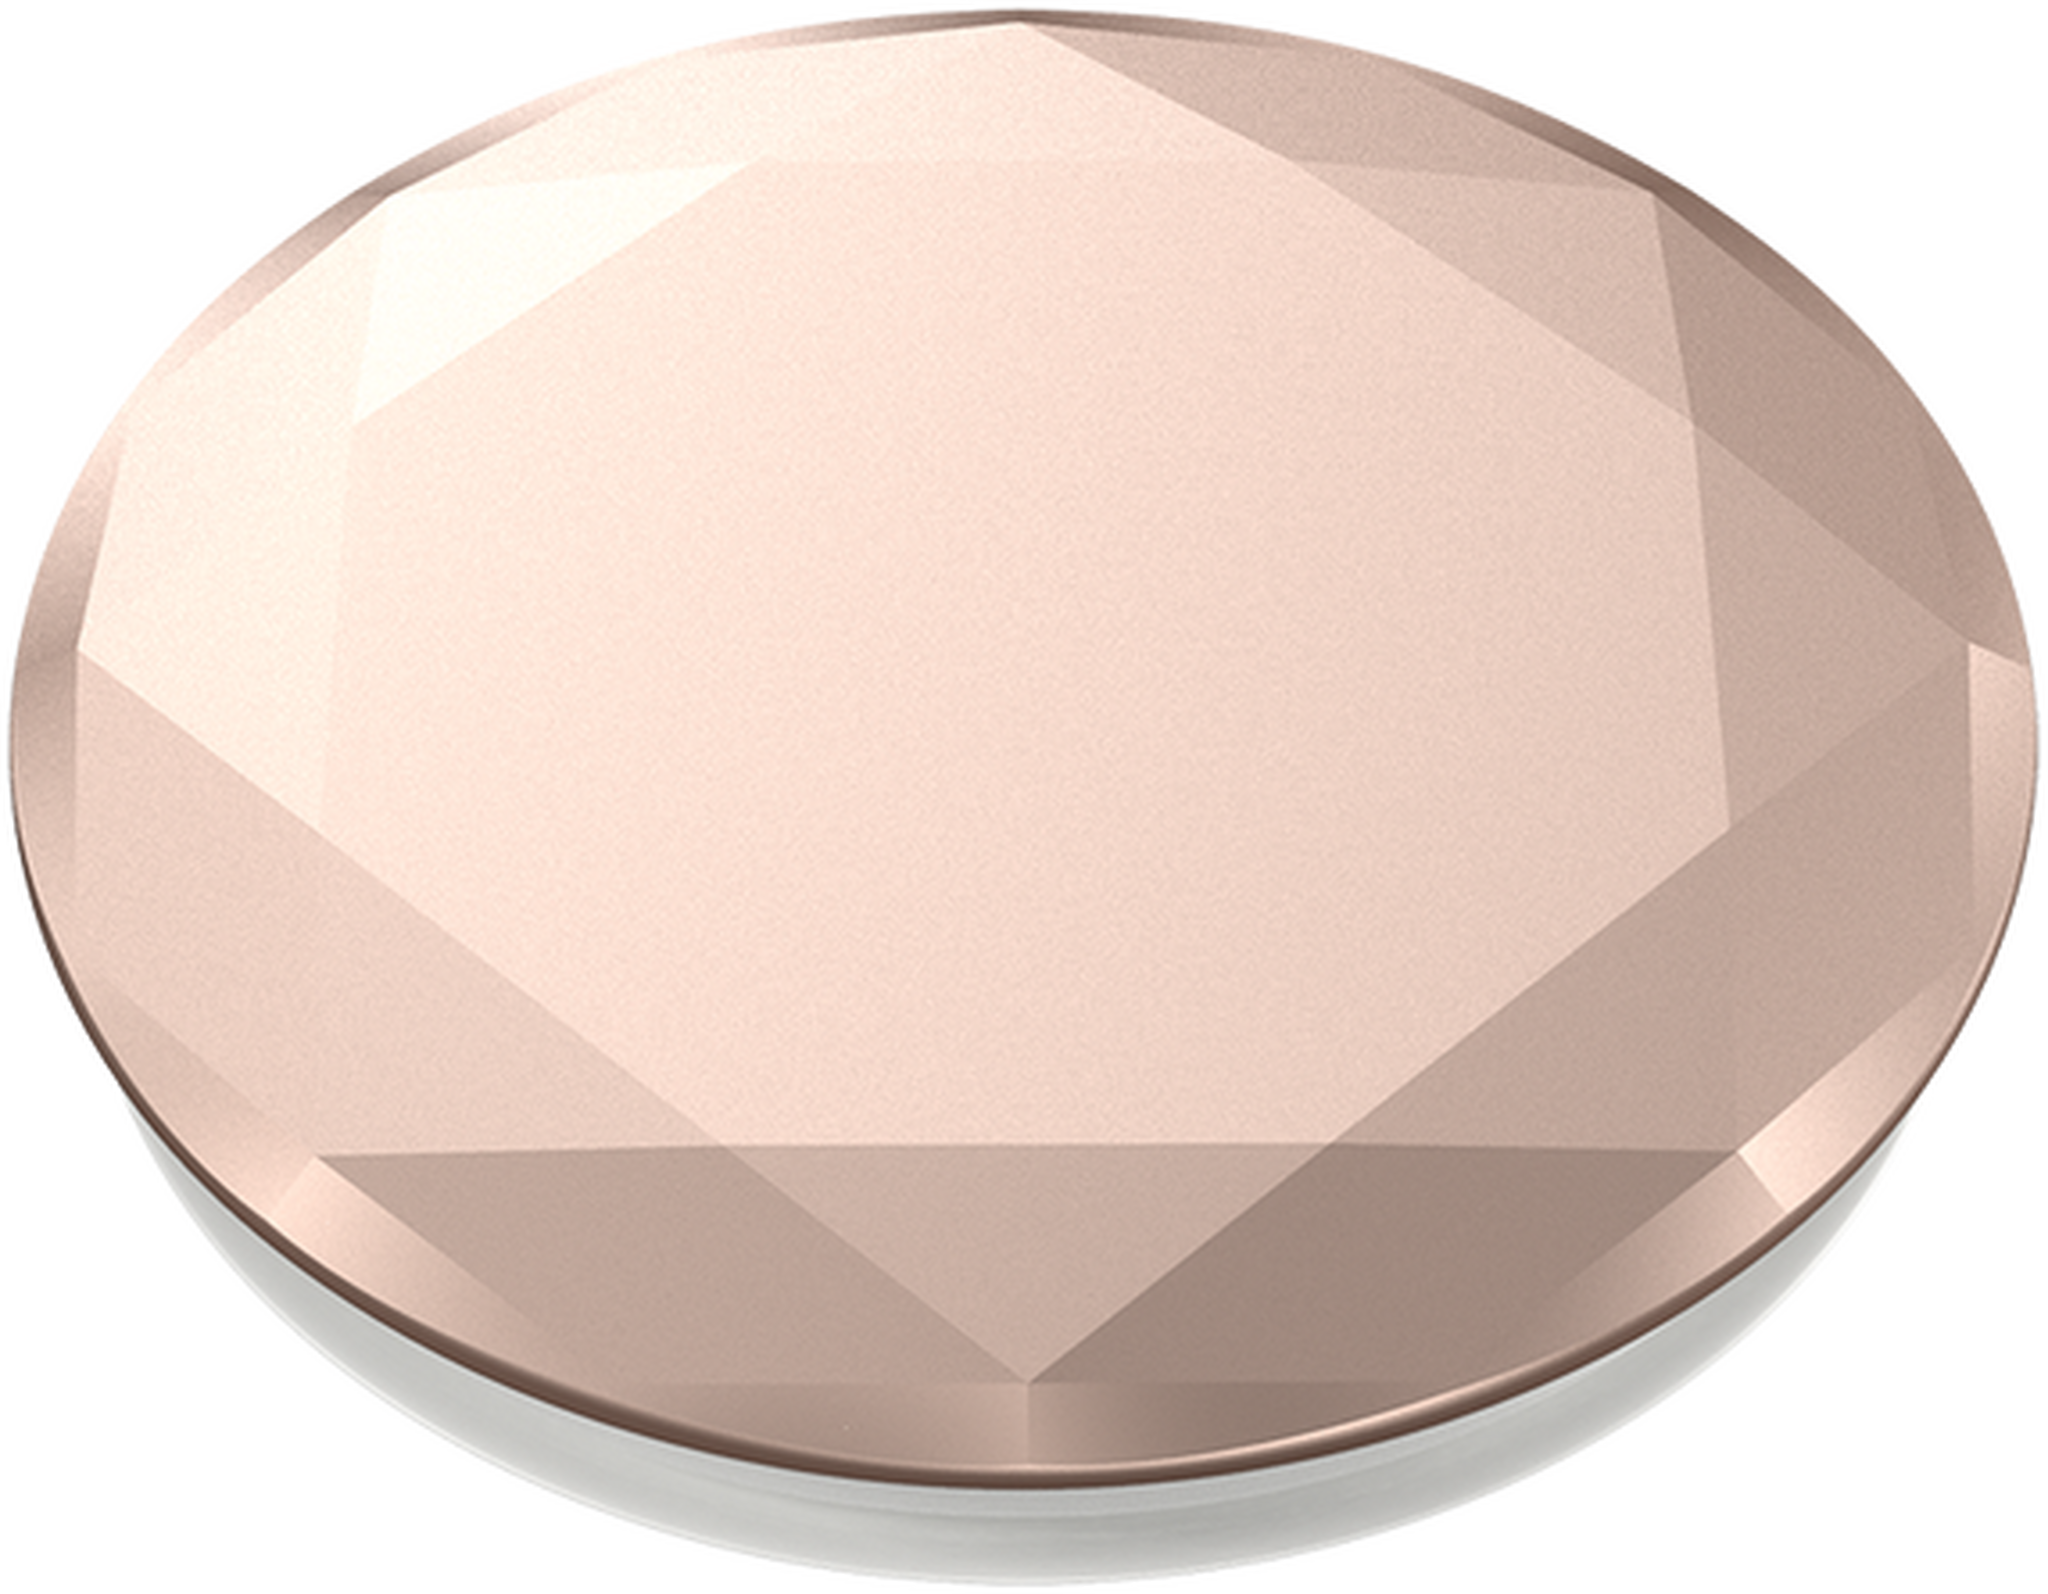 PopSockets Phone Stand and Grip (800491) – Metallic Diamond Rose Gold